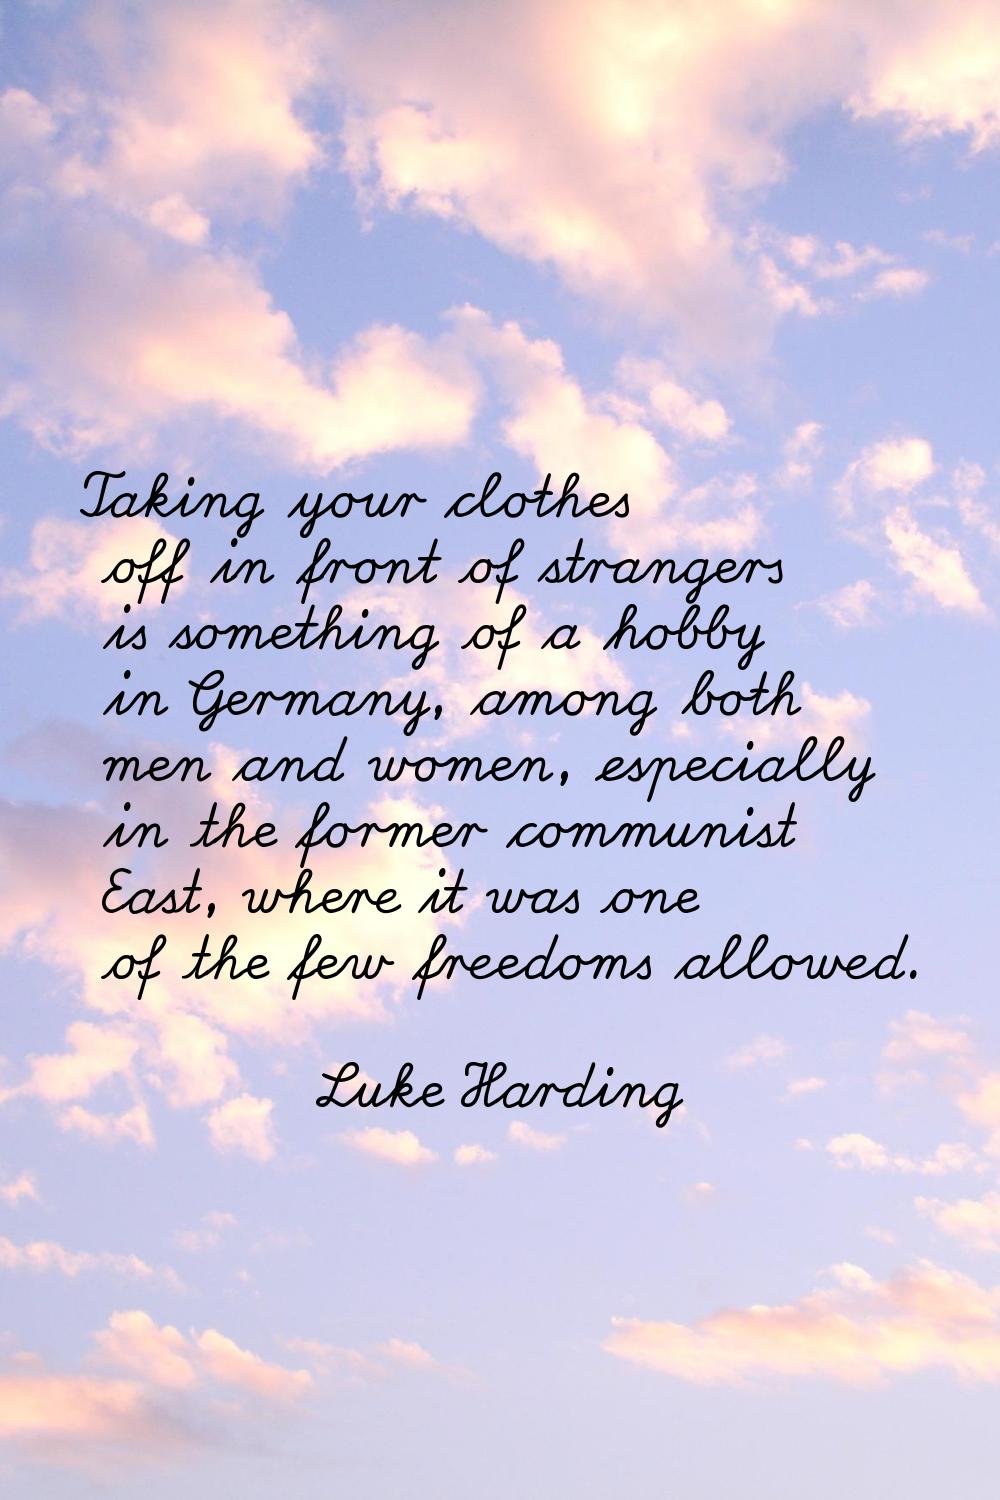 Taking your clothes off in front of strangers is something of a hobby in Germany, among both men an